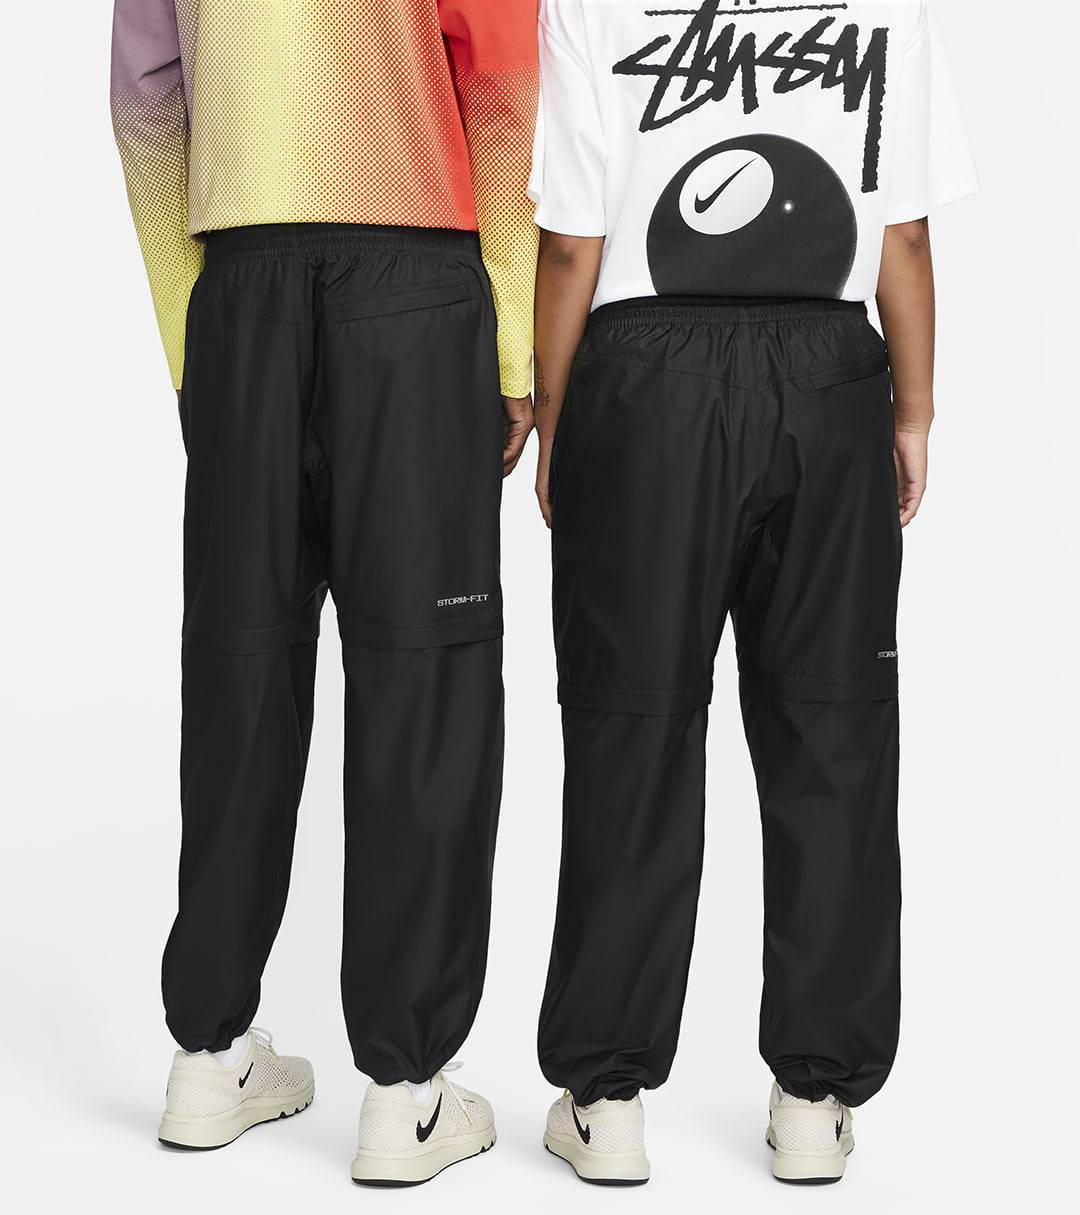 22ss NIKE STUSSY STORM FIT PANTS 黒ウェスト46